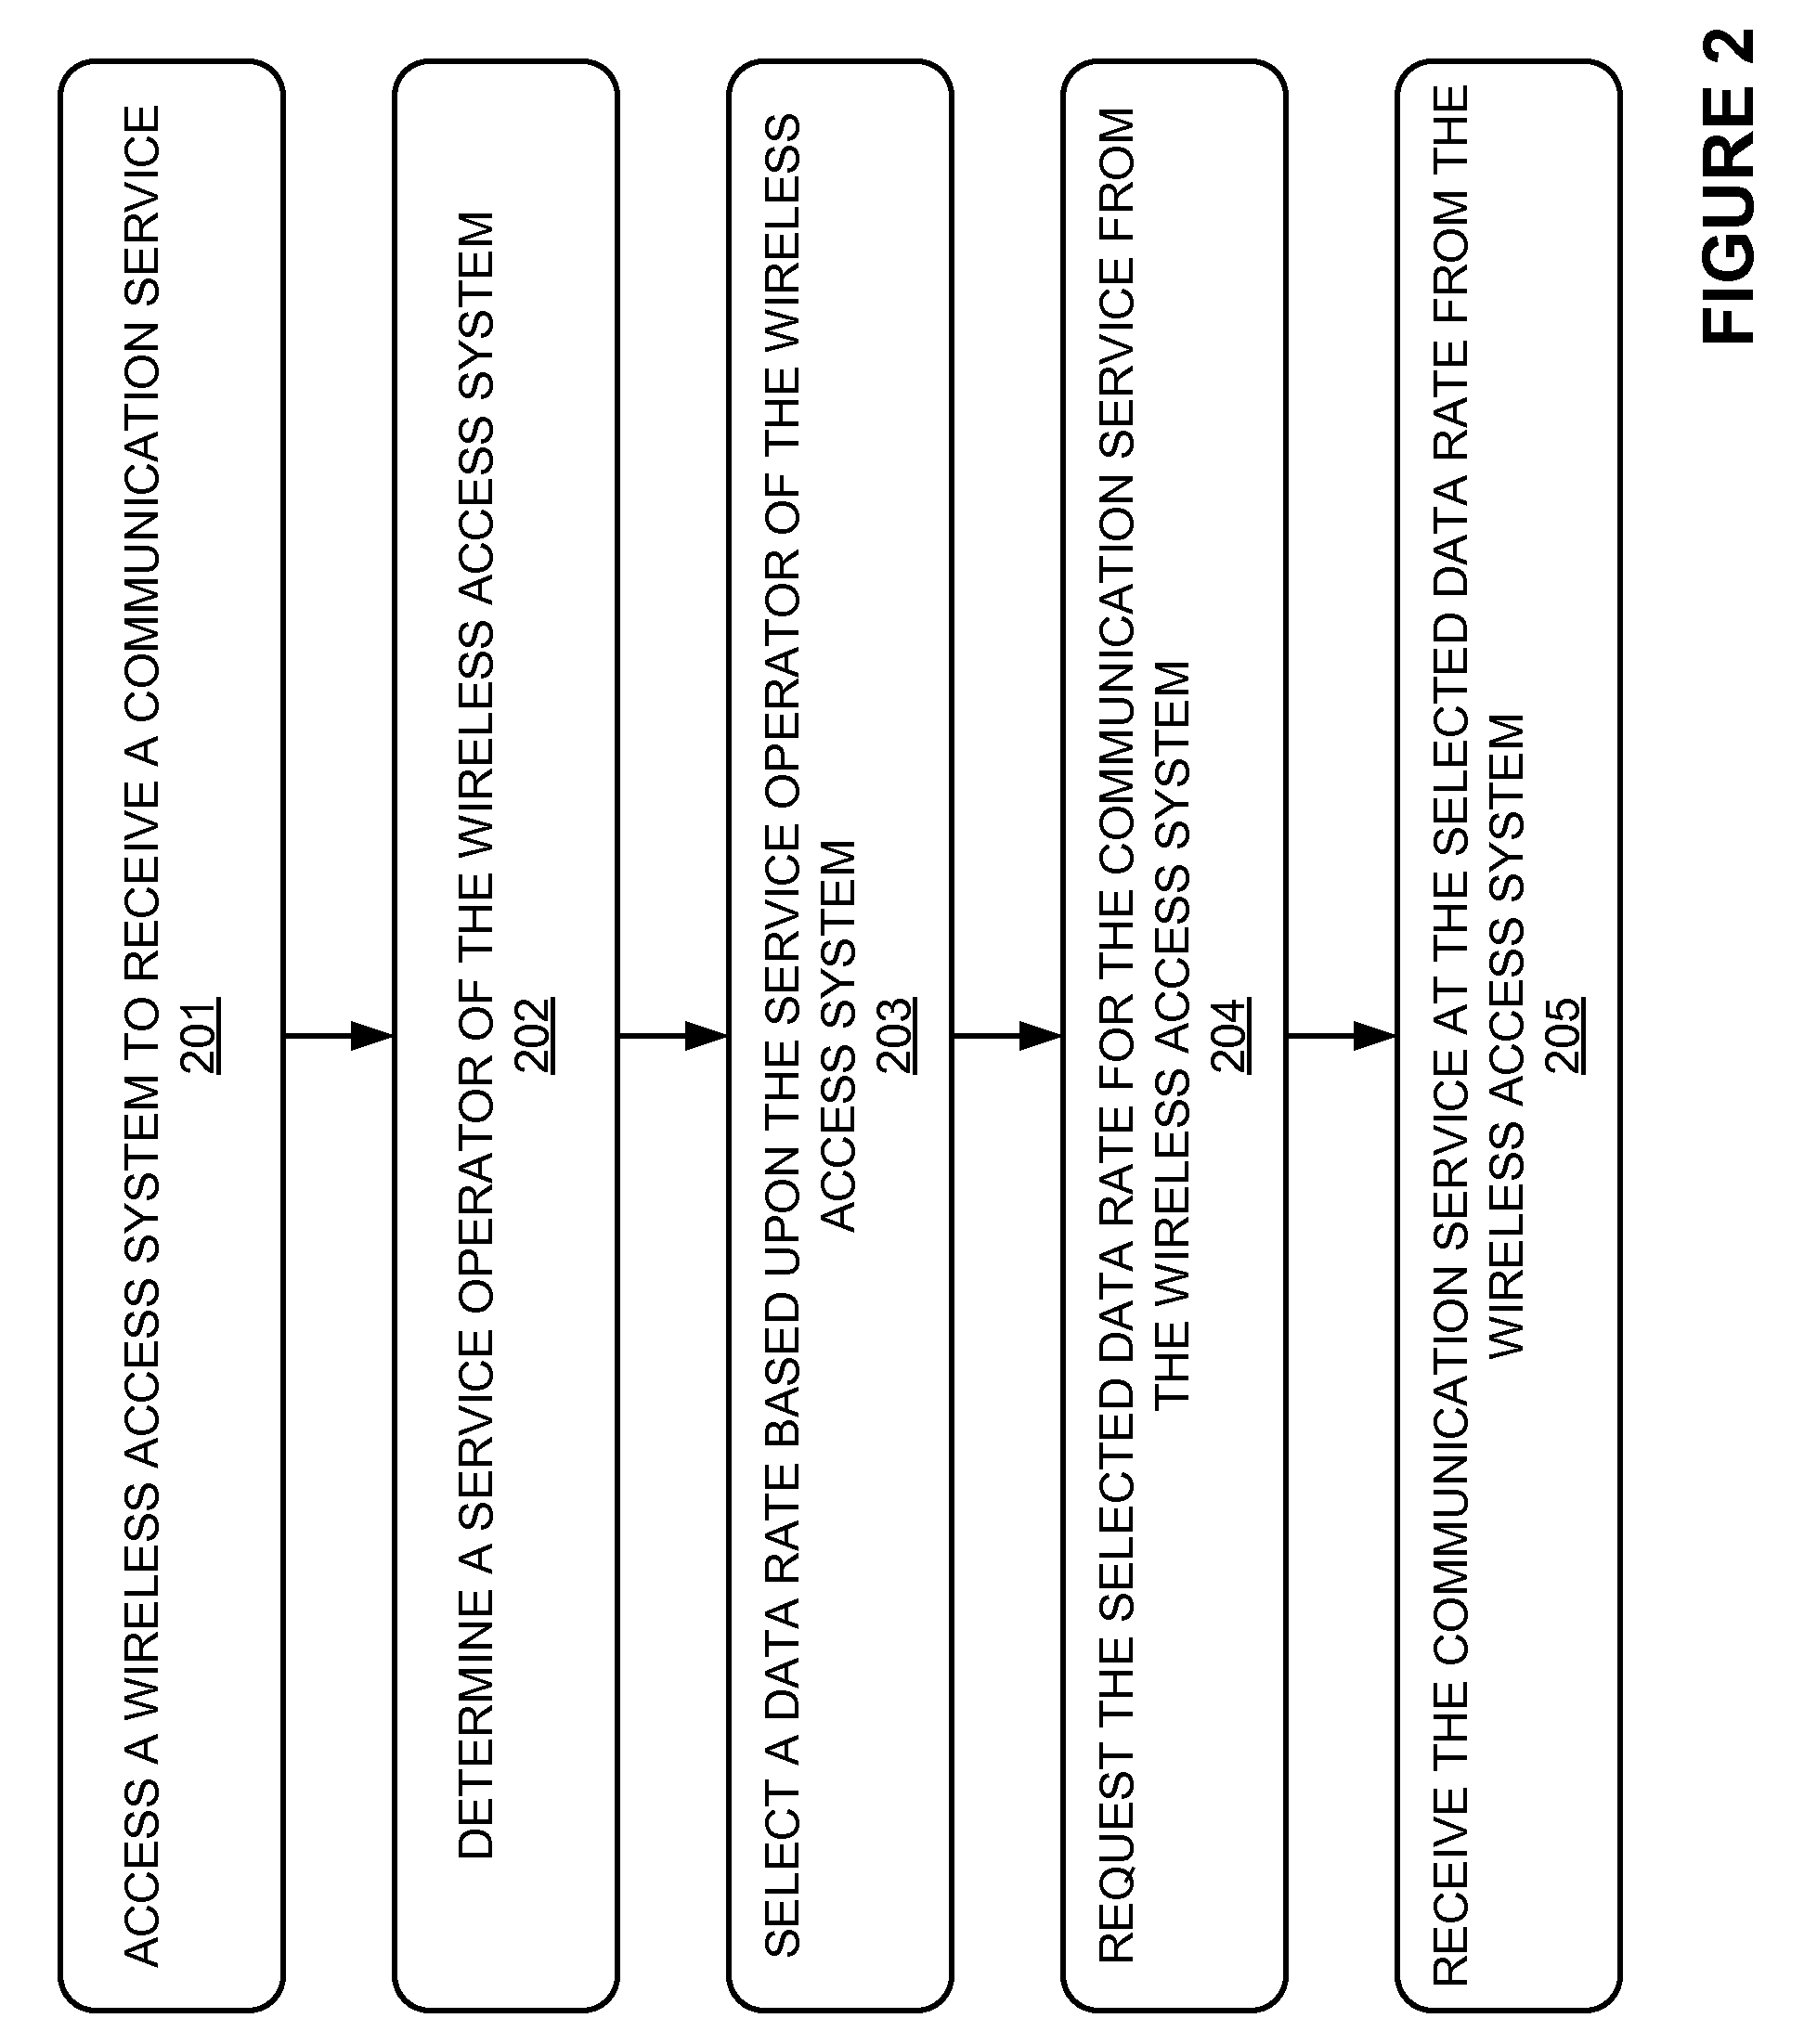 Data rate selection for wireless communication devices